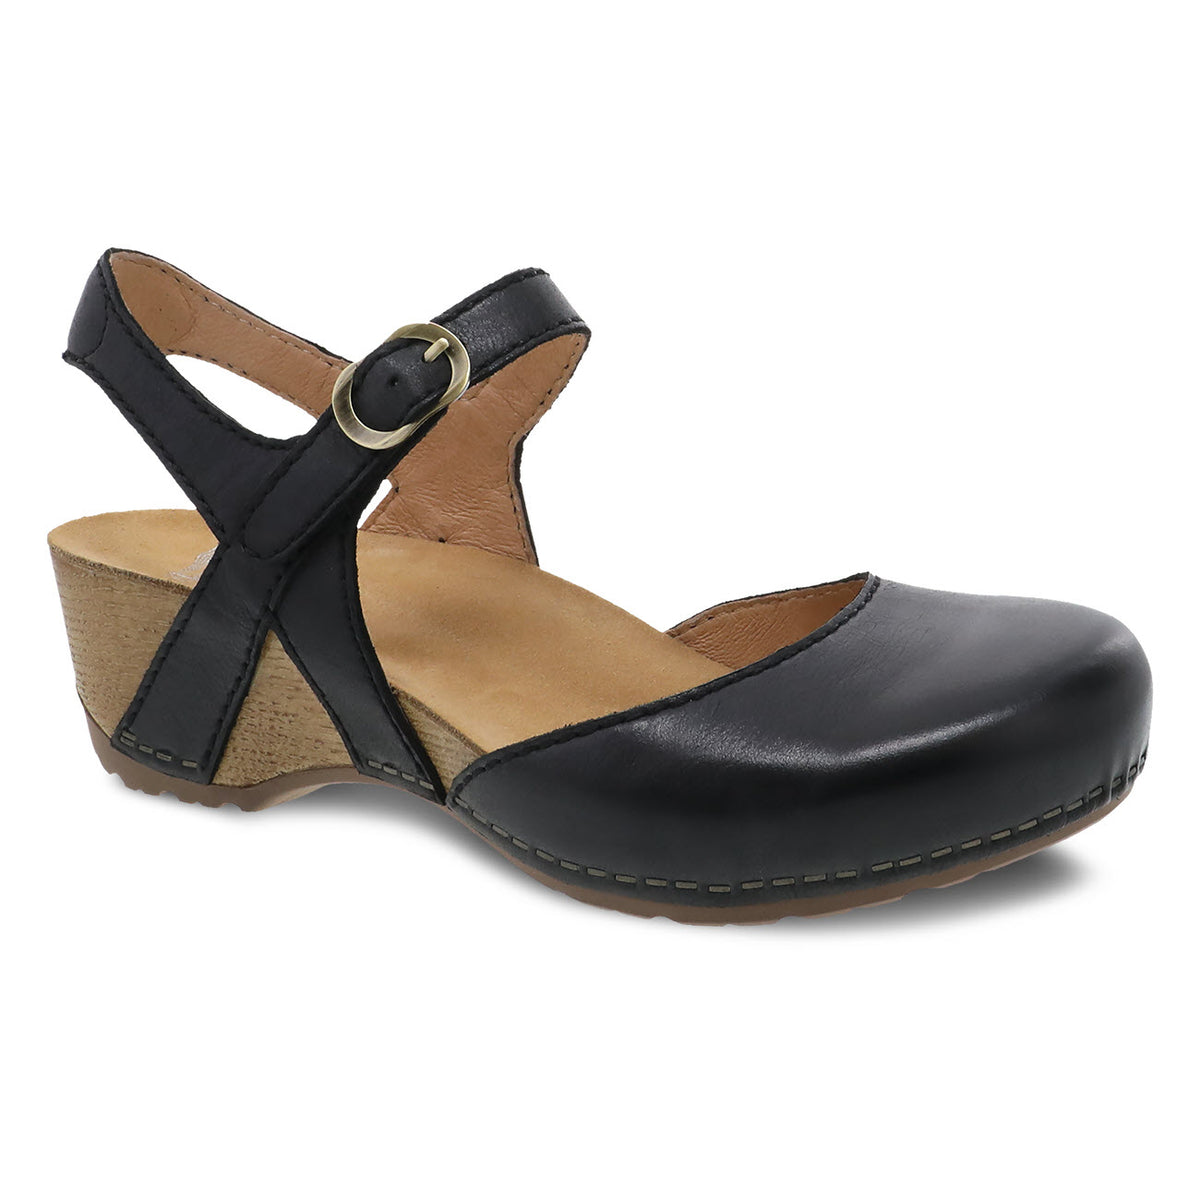 Dansko Tiffani black milled mary jane style shoe with burnished leather uppers and a chunky heel on a white background.